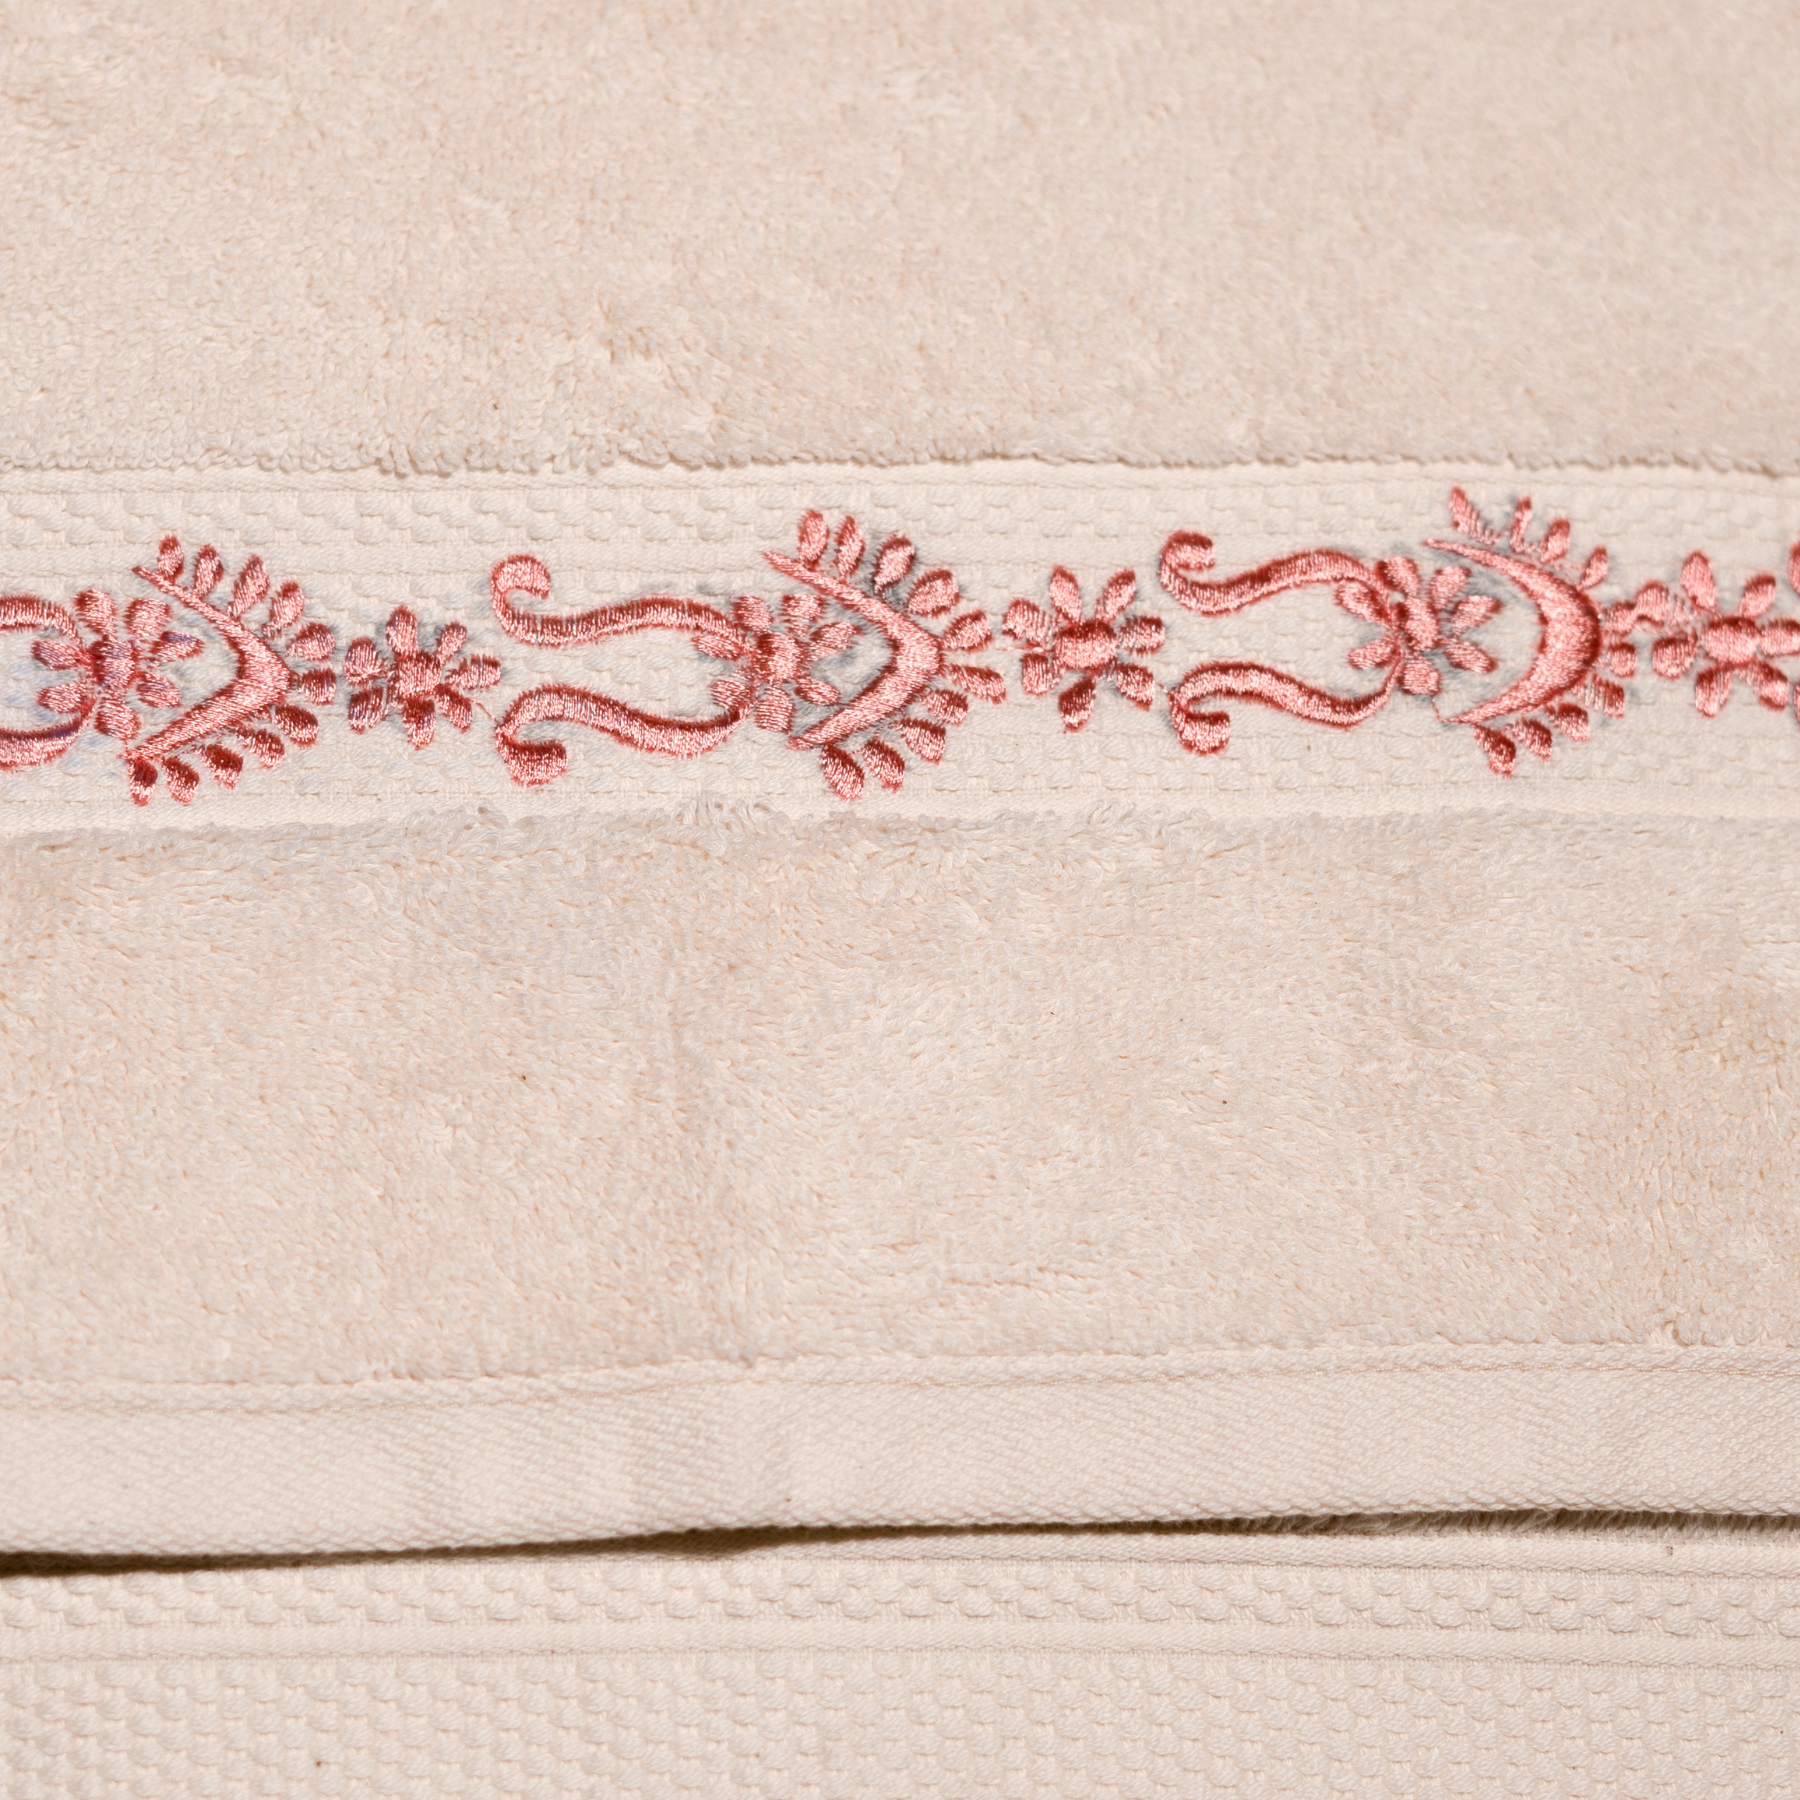 The Luxelife Ivory Embroidered Hand Towel